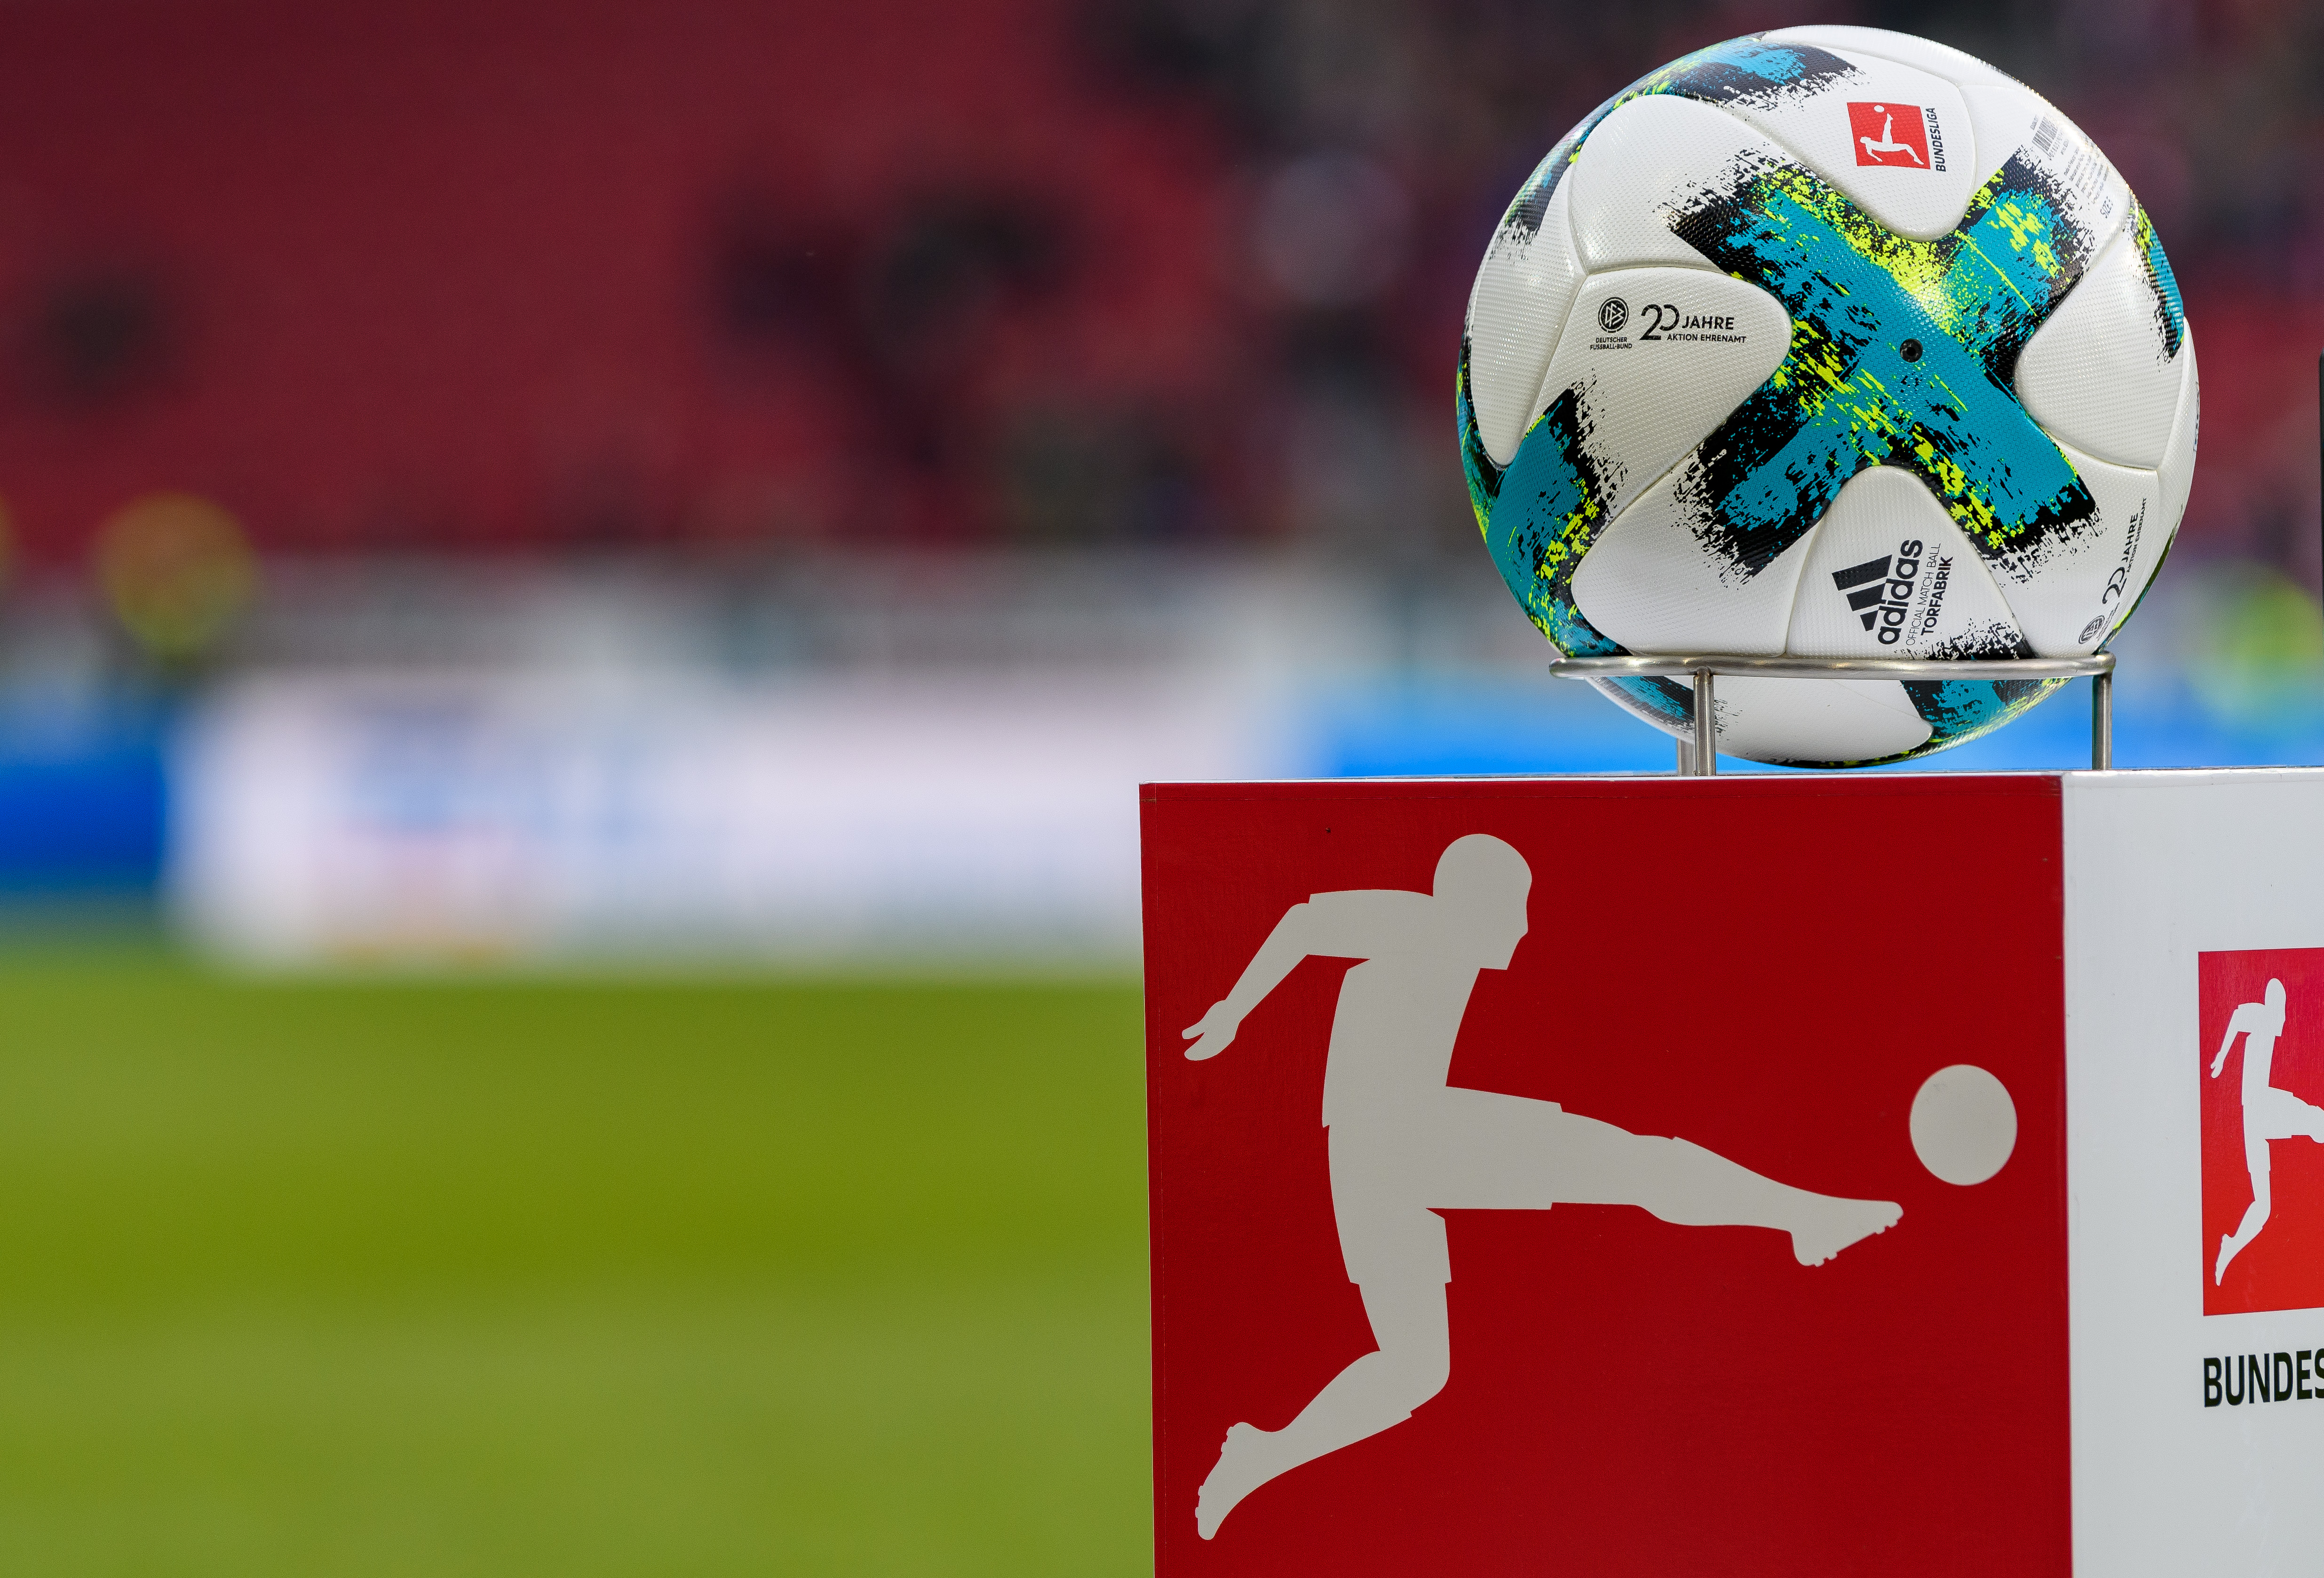 MAINZ, GERMANY - DECEMBER 02: The matchball is seen with the logo '20 Jahre Ehrenamt' during the Bundesliga match between 1. FSV Mainz 05 and FC Augsburg at Opel Arena on December 2, 2017 in Mainz, Germany. (Photo by Alexander Scheuber/Bongarts/Getty Images)